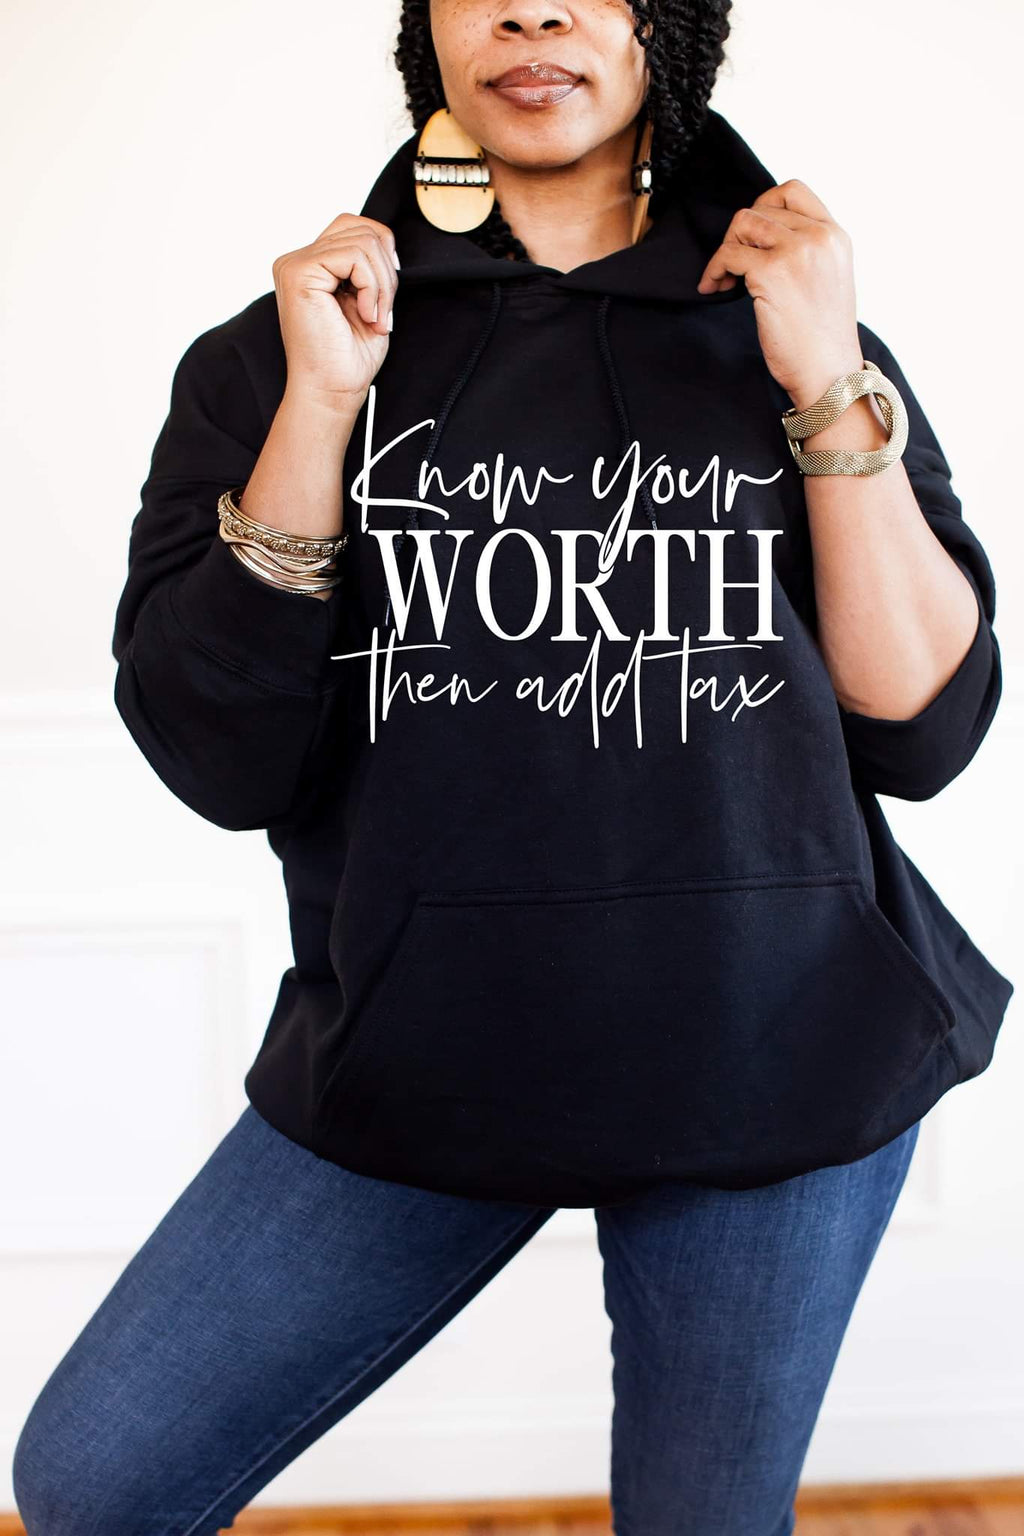 Know your worth. Then add tax Zipper Pouch